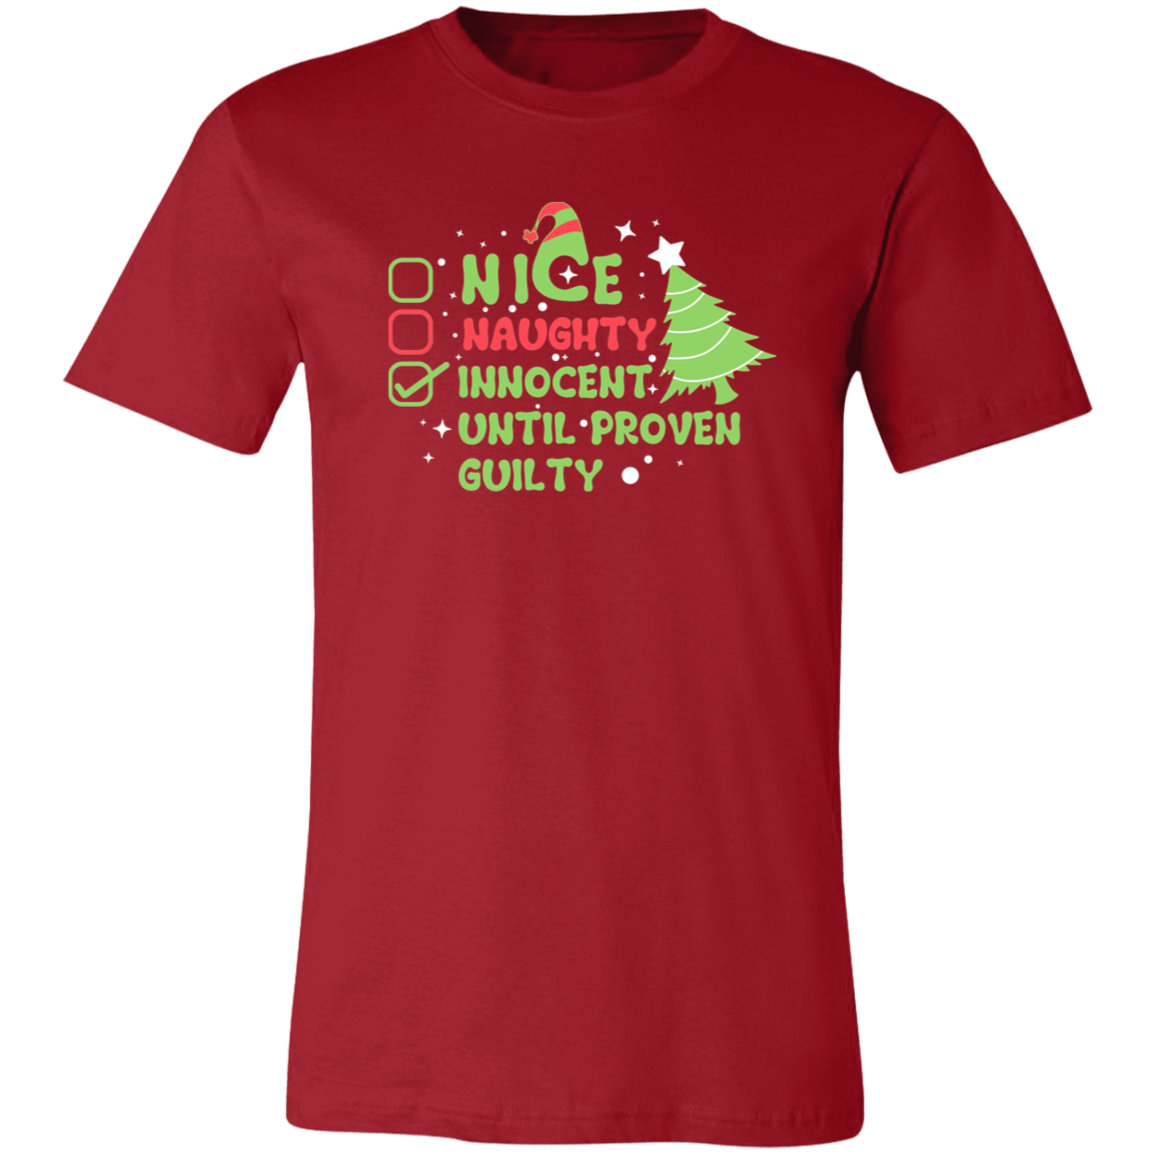 Nice, Naughty, Or Innocent Until Proven Guilty Shirt